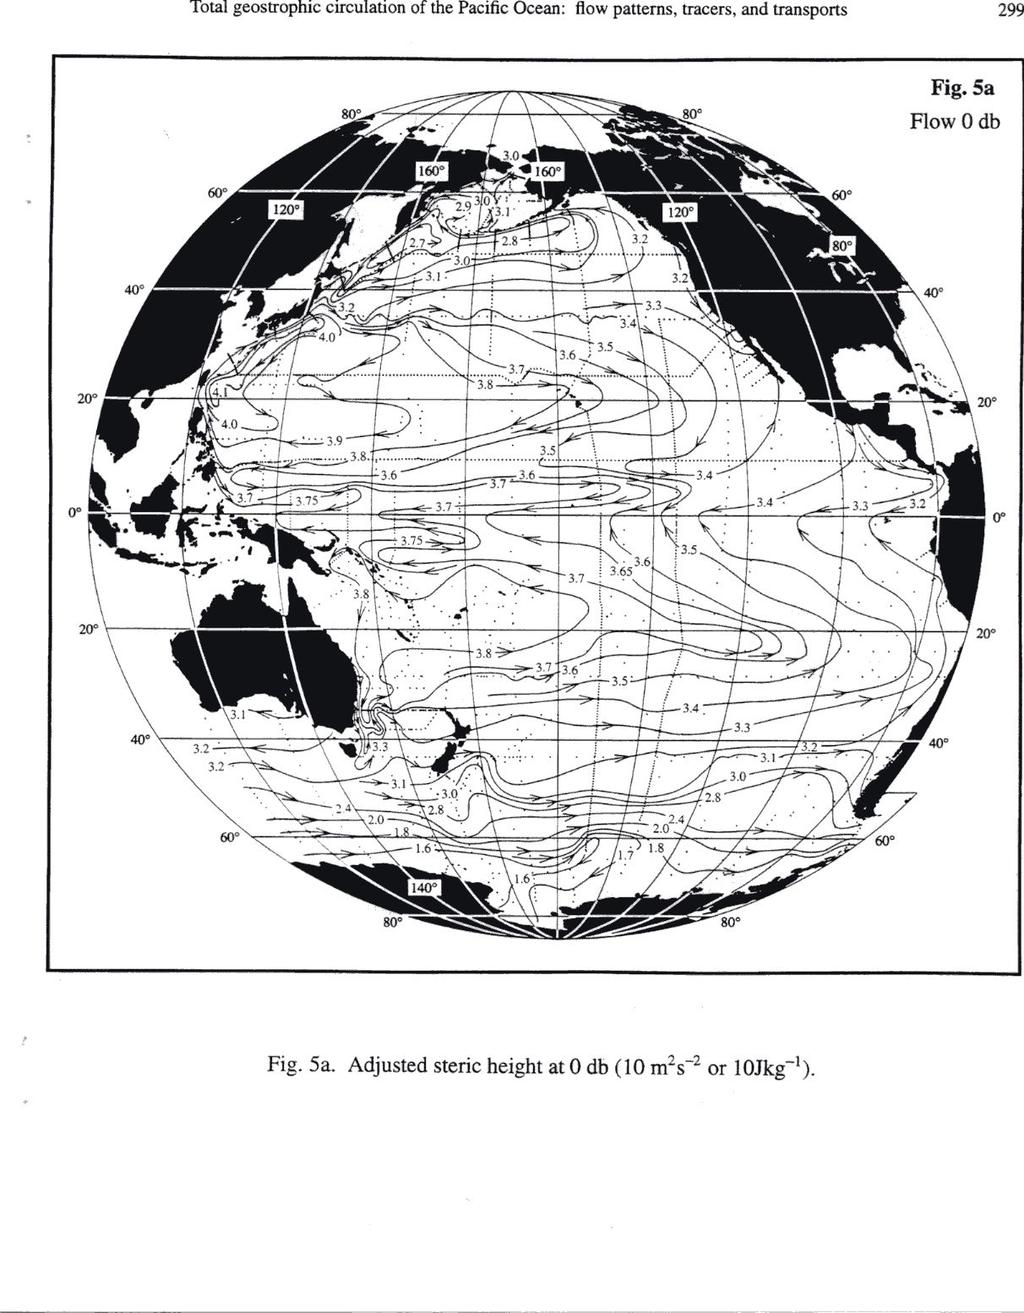 17. (4 points) (a) The Pacific surface steric height and inferred direction of circulation is shown in the figure (from Reid, 1997).